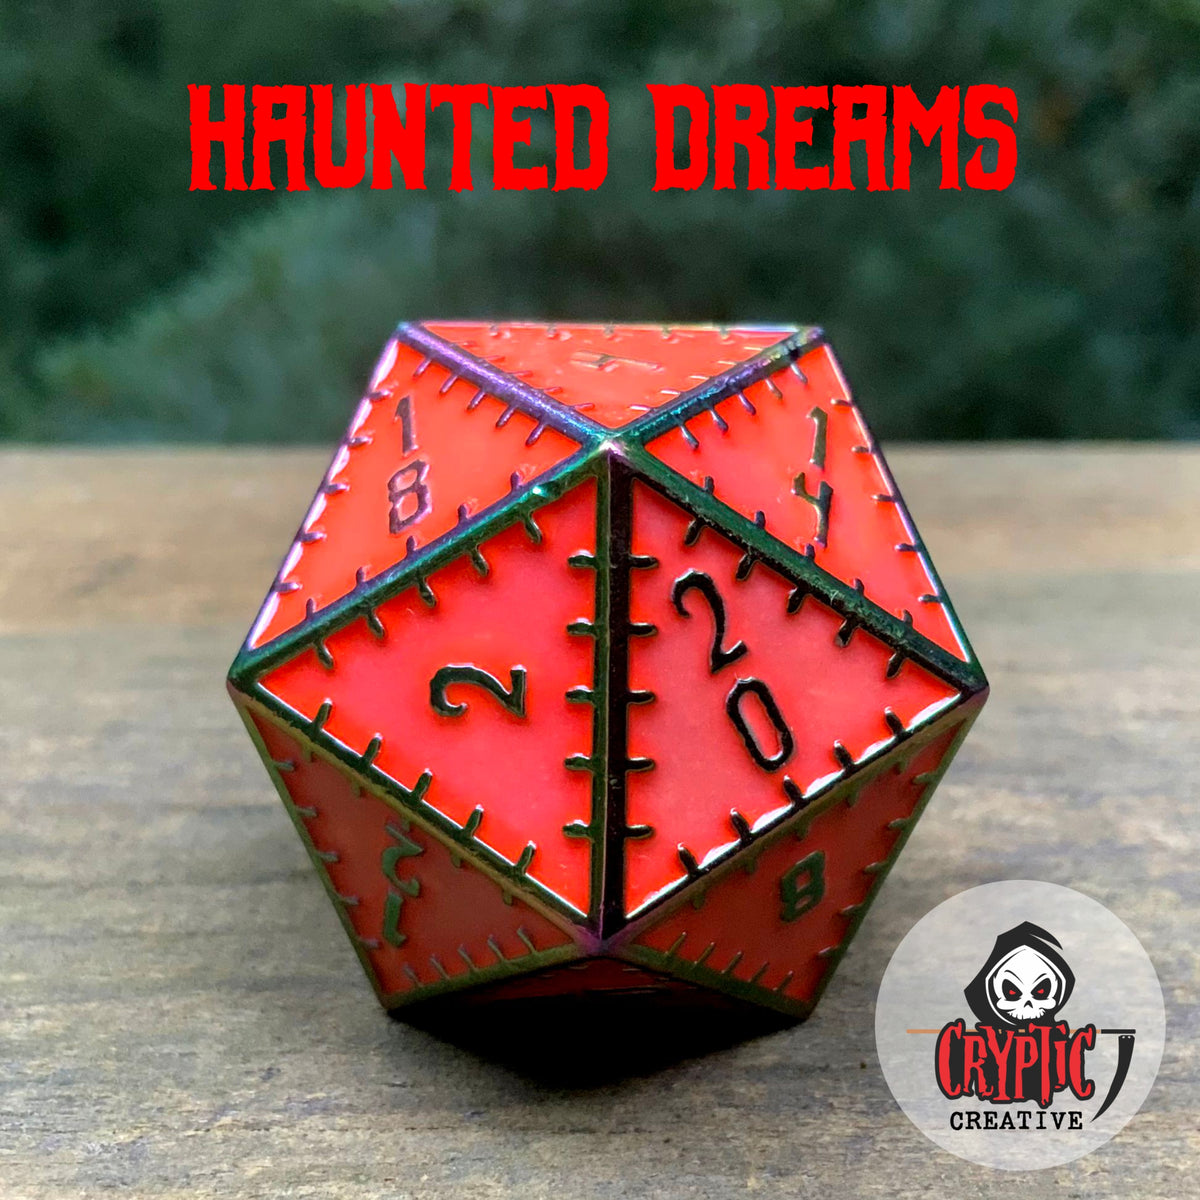 Haunted Dreams - 35mm d20-Cryptic Creative-Metal Dice-DND Dice-Large Dice-D&amp;D Dice-Cryptic Creative